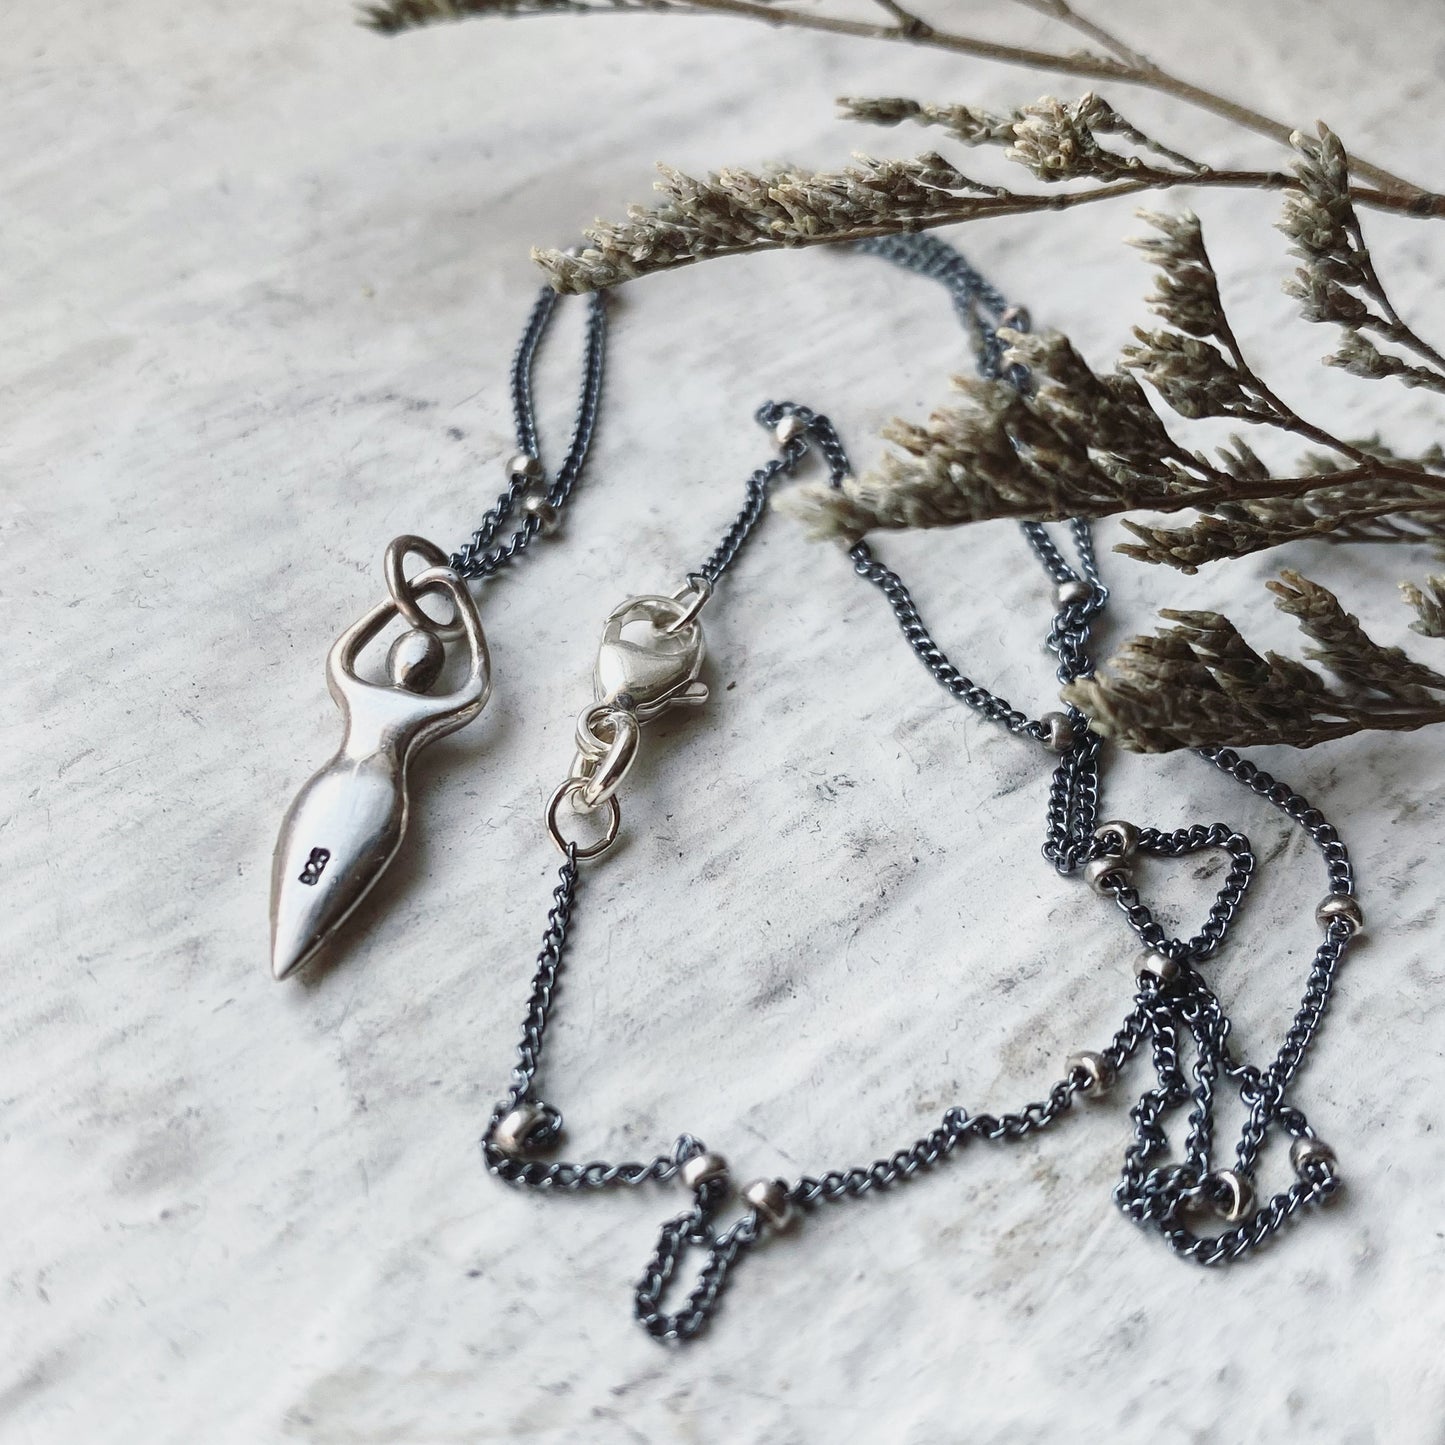 Winter Goddess Pendant ✦ Light in the Darkness Mini Collection